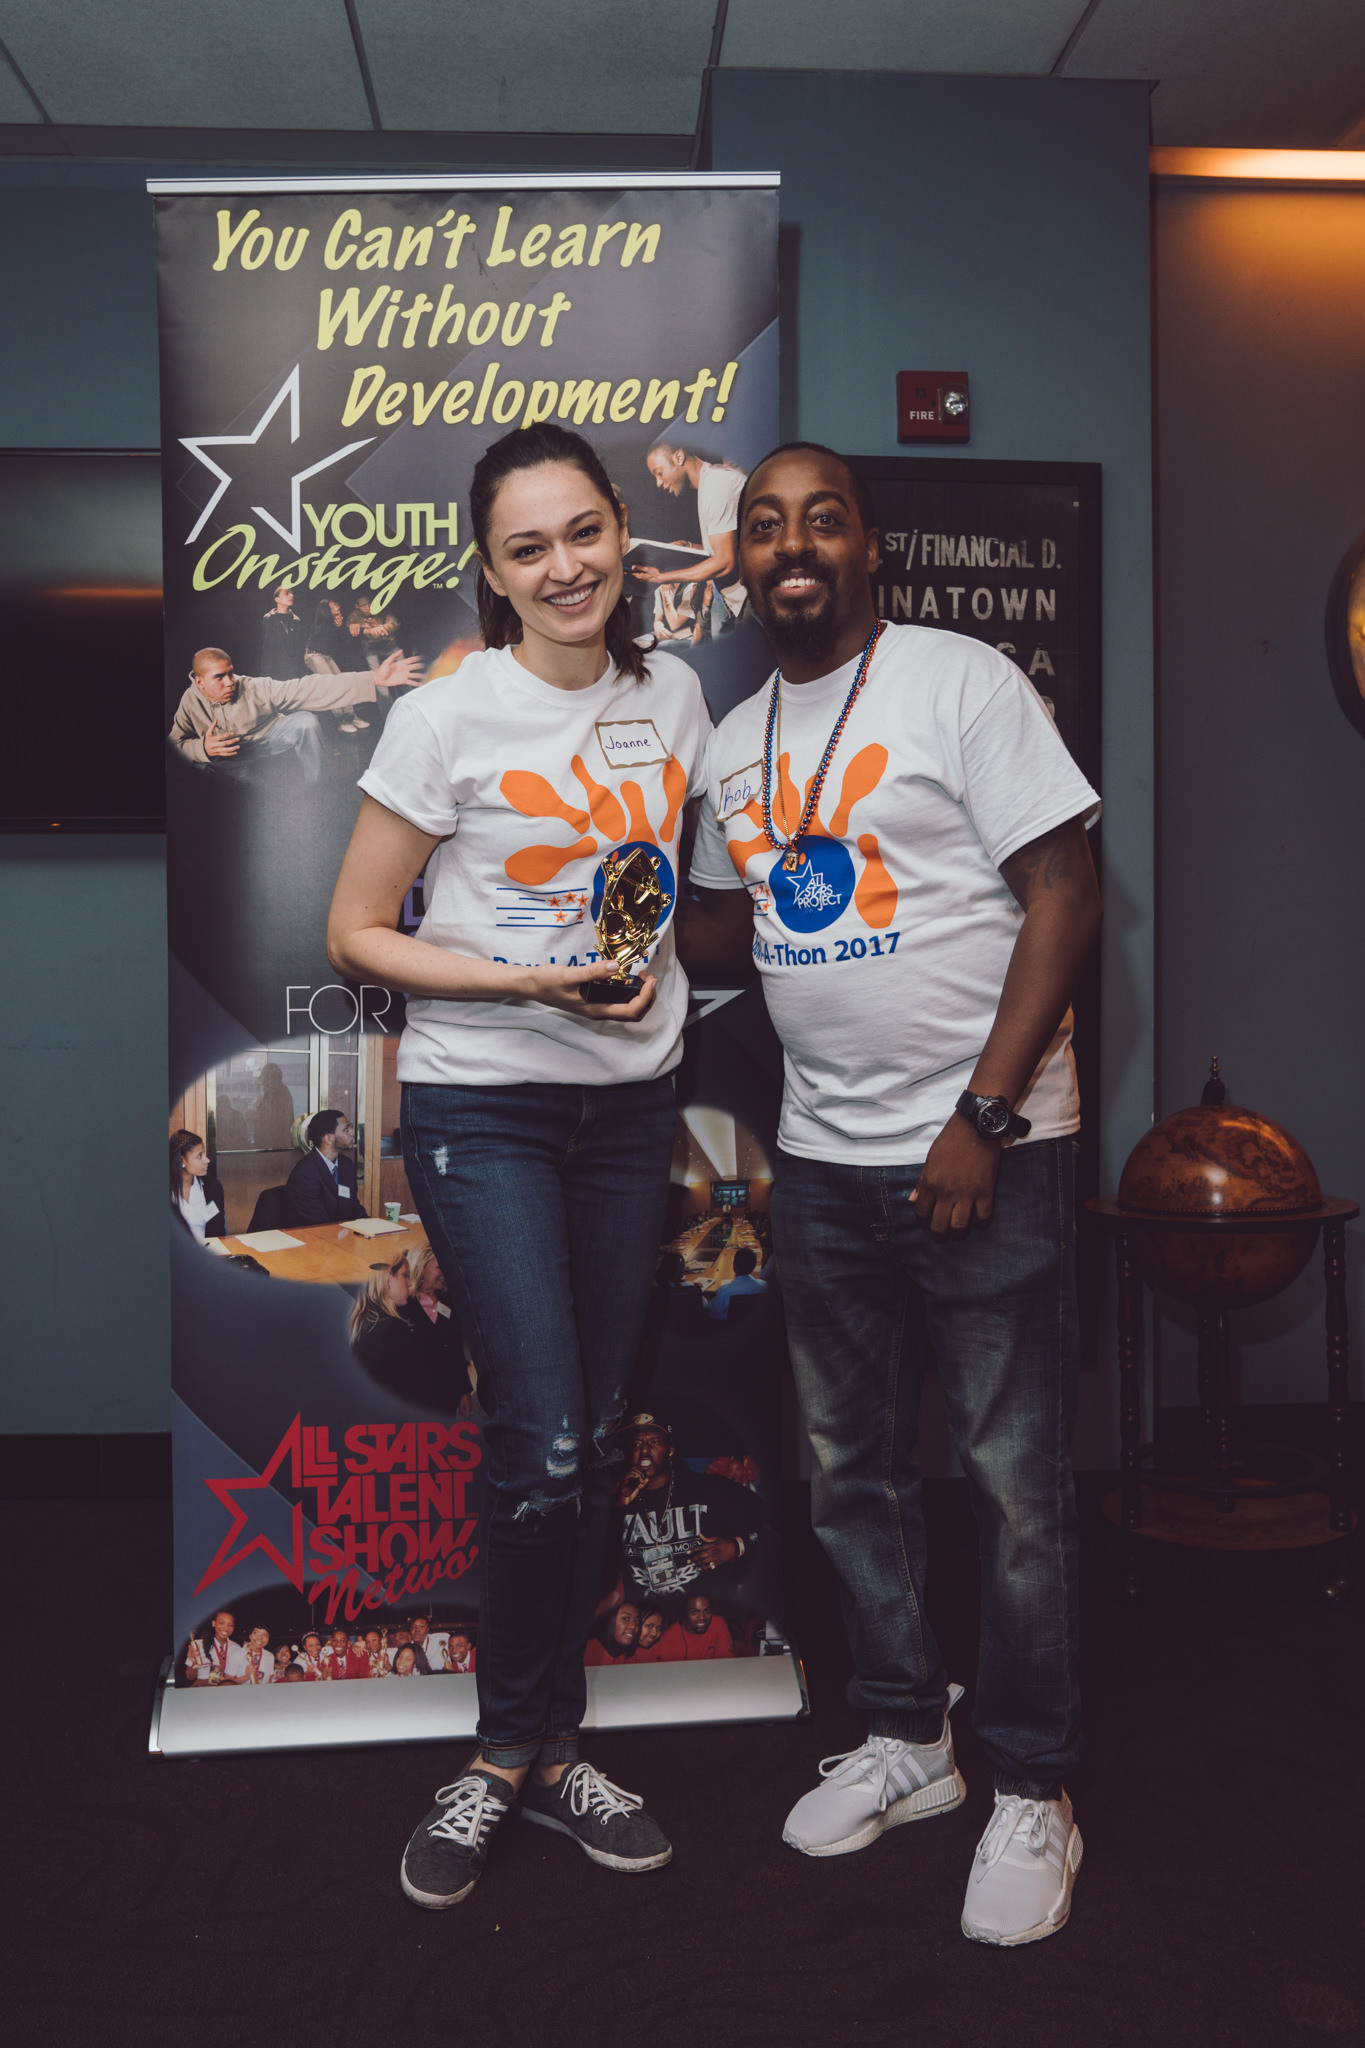  Celebrating high fundraising numbers at All Stars Project's annual Bowl-A-Thon fundraising event. Photo by Daniel Lee. 